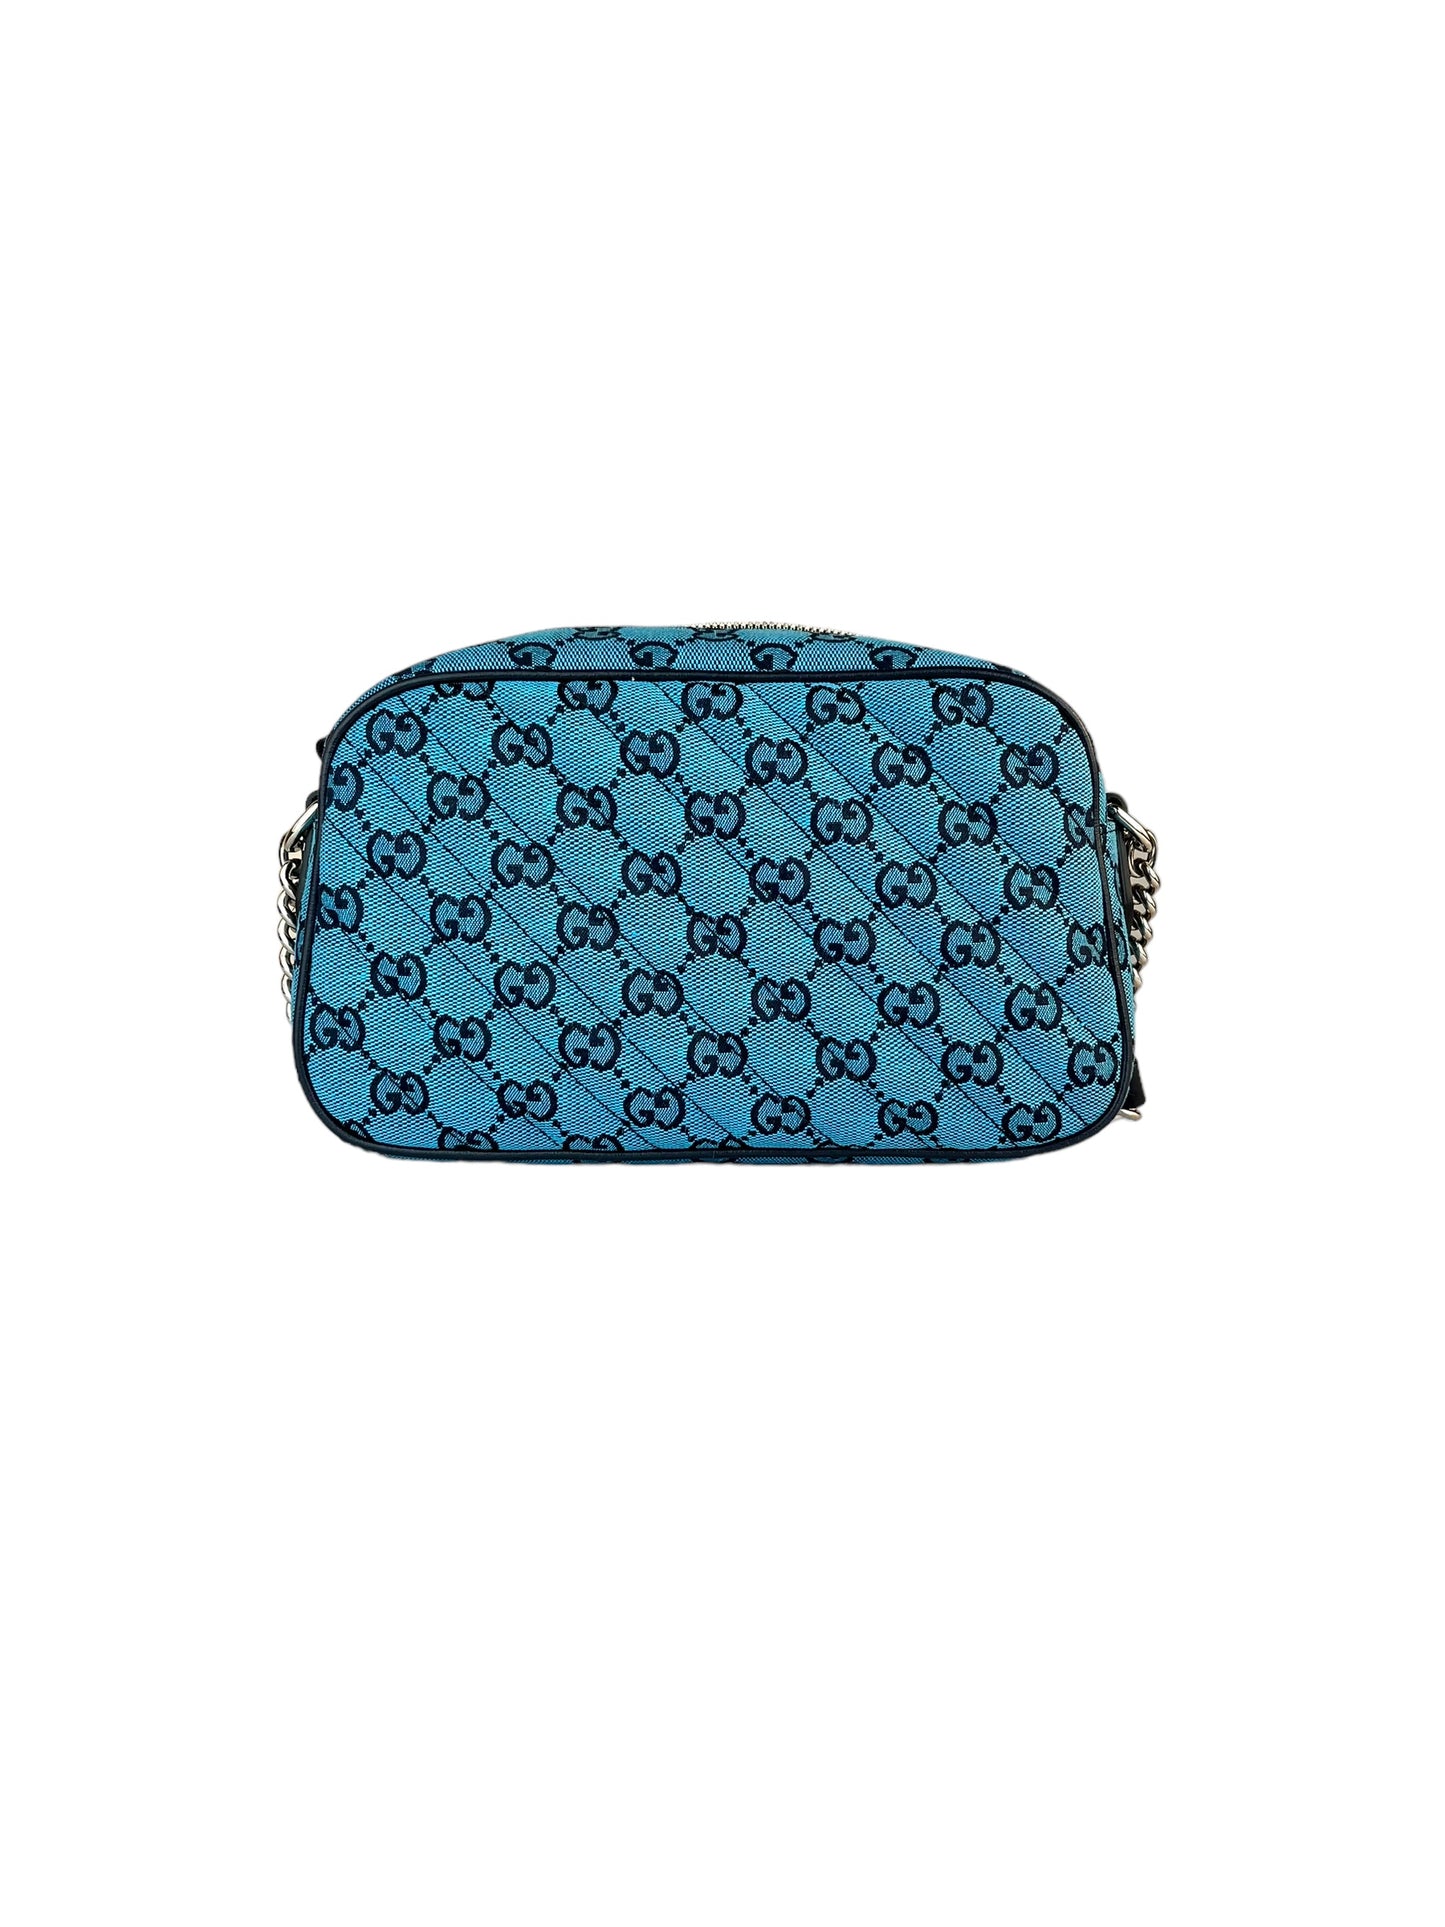 Gucci GG Diagonal Quilted Canvas Marmont Camera Bag